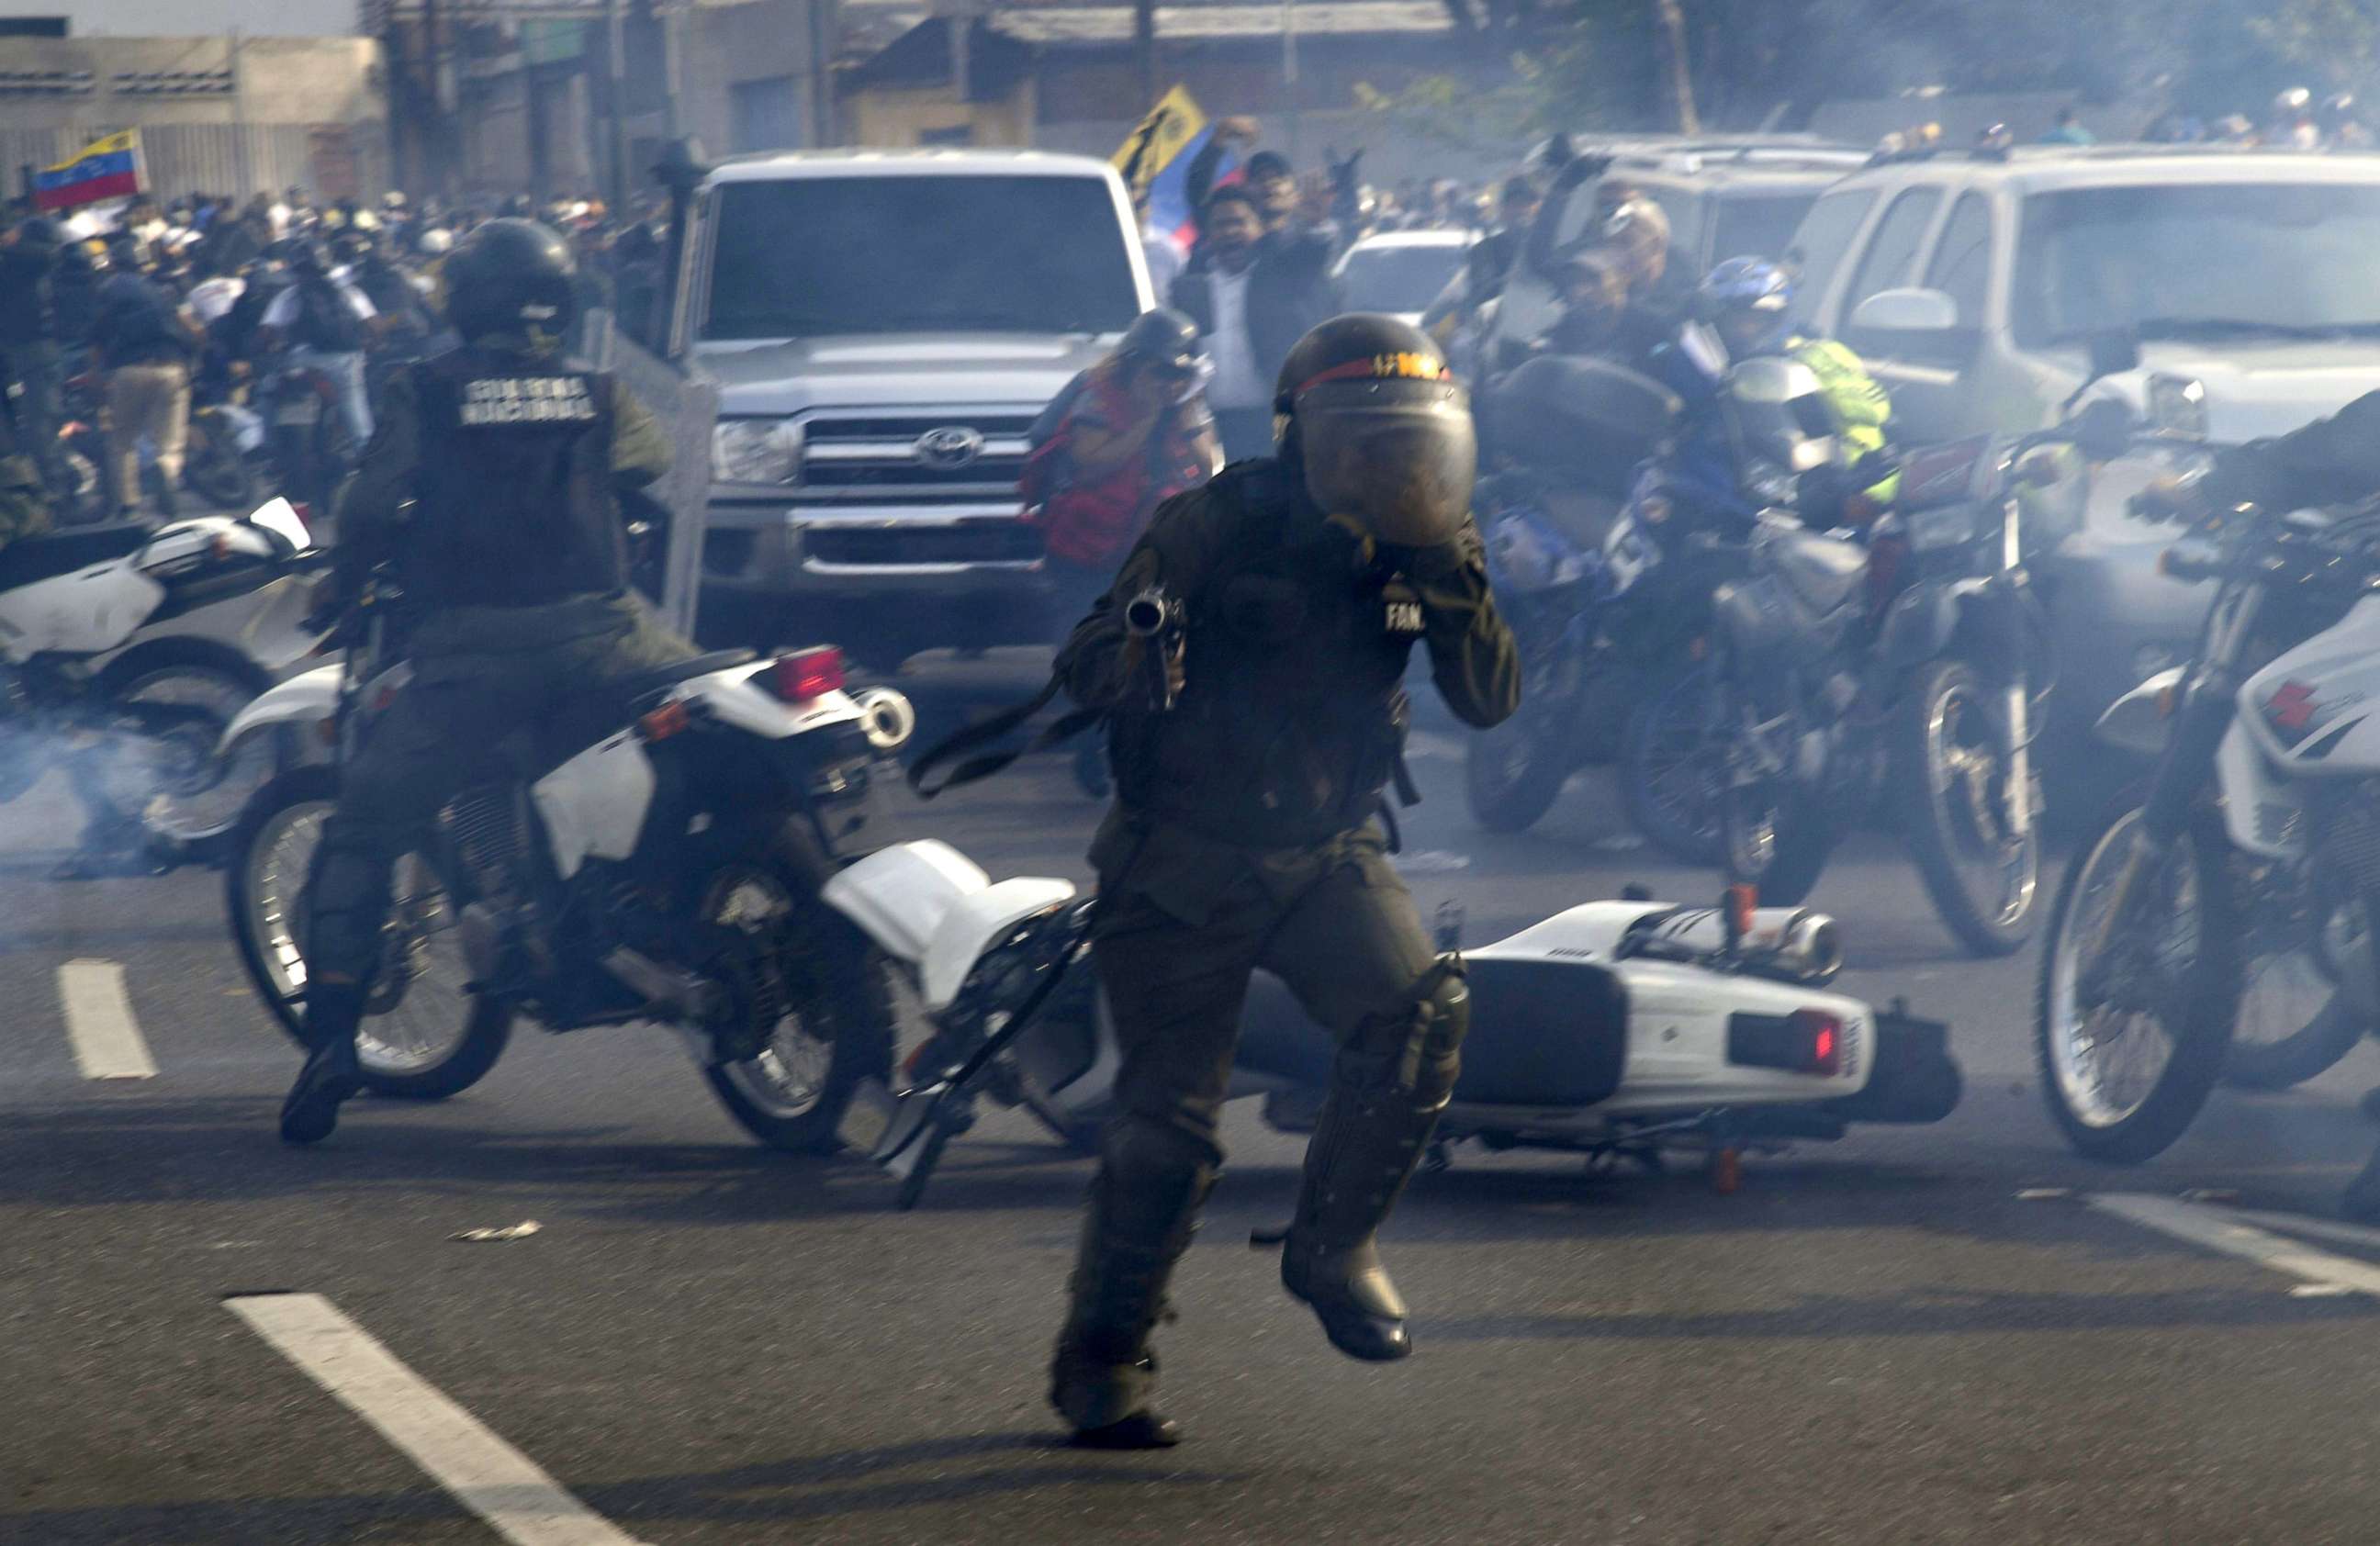 PHOTO:Members of the Bolivarian National Guard run under a cloud of tear gas after being repelled by guards supporting Venezuelan opposition leader Juan Guaido upon arriving to disperse demonstrators, in Caracas, April 30, 2019.